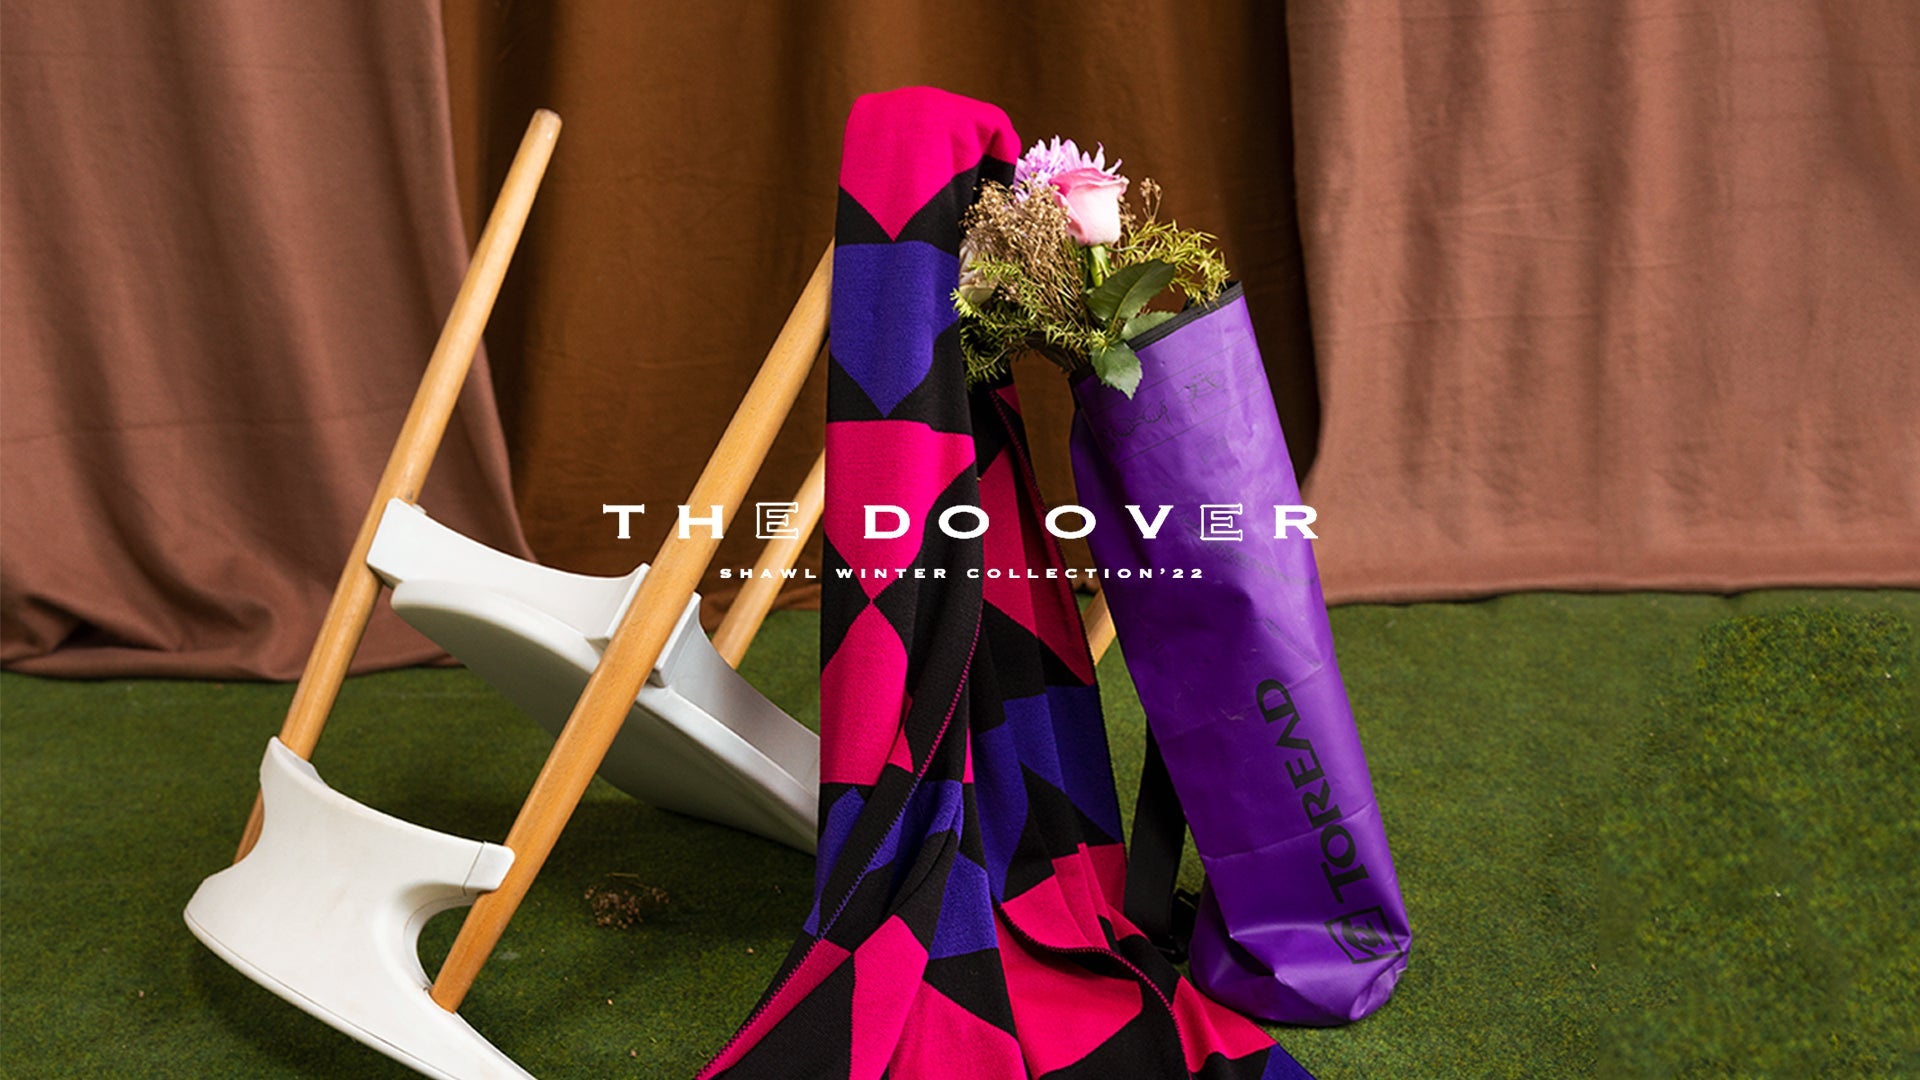 THE DO OVER - SHAWL WINTER COLLECTION'22